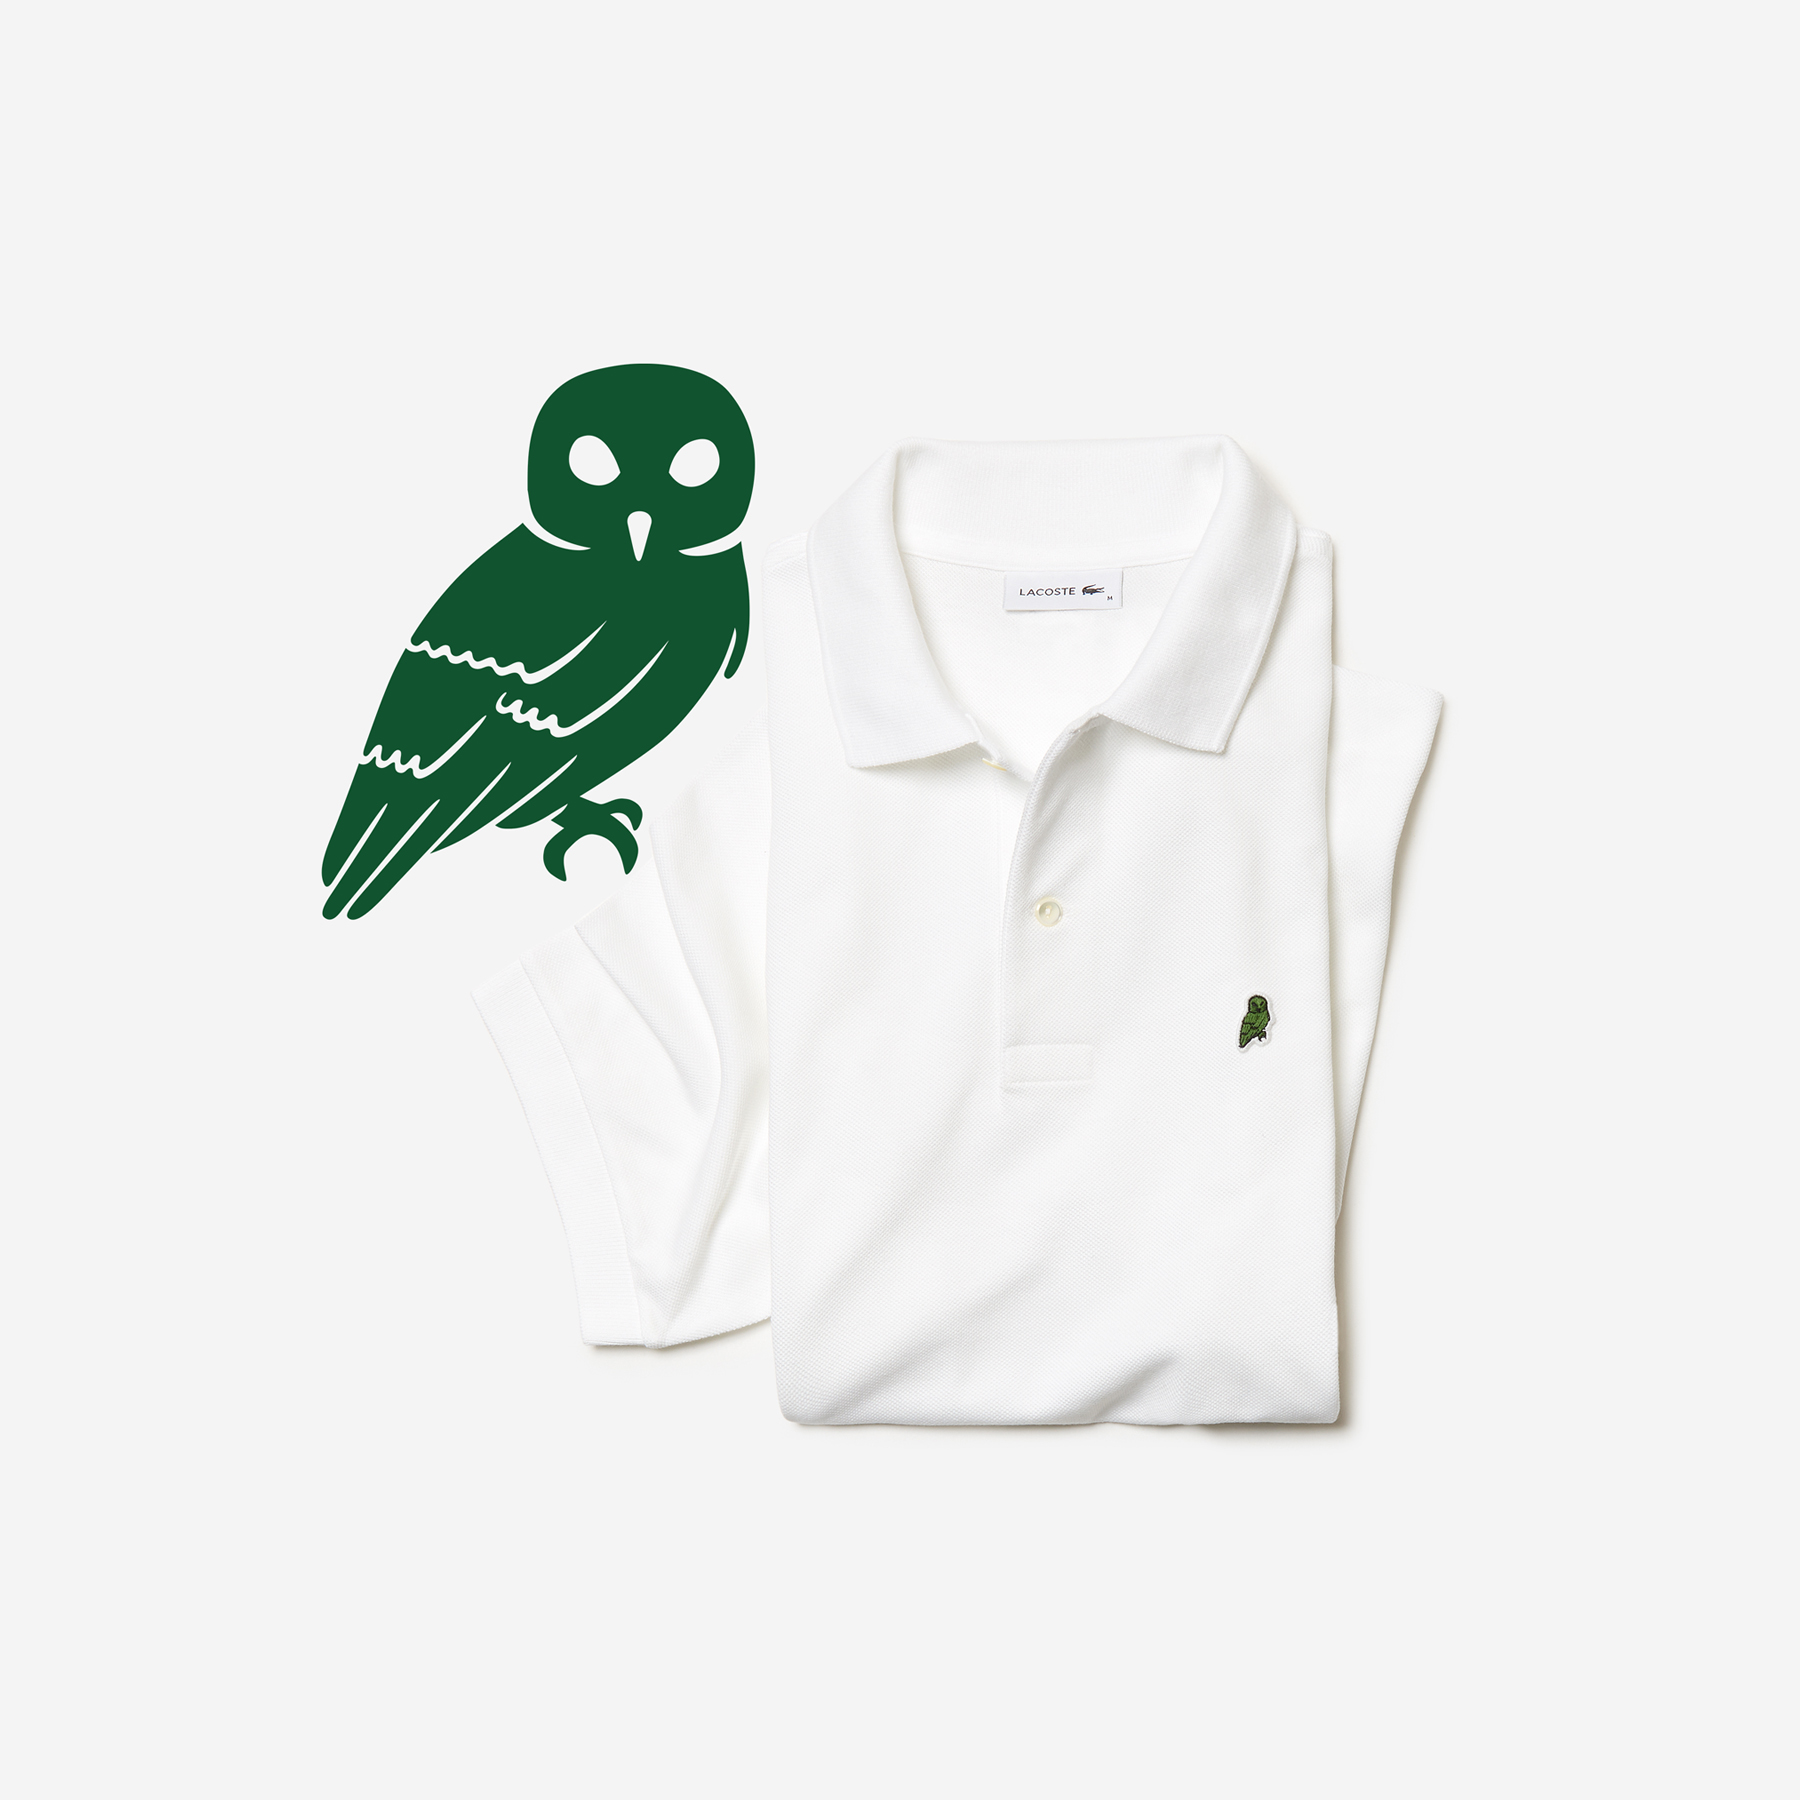 Lacoste x Save Our Species (IUCN) Life